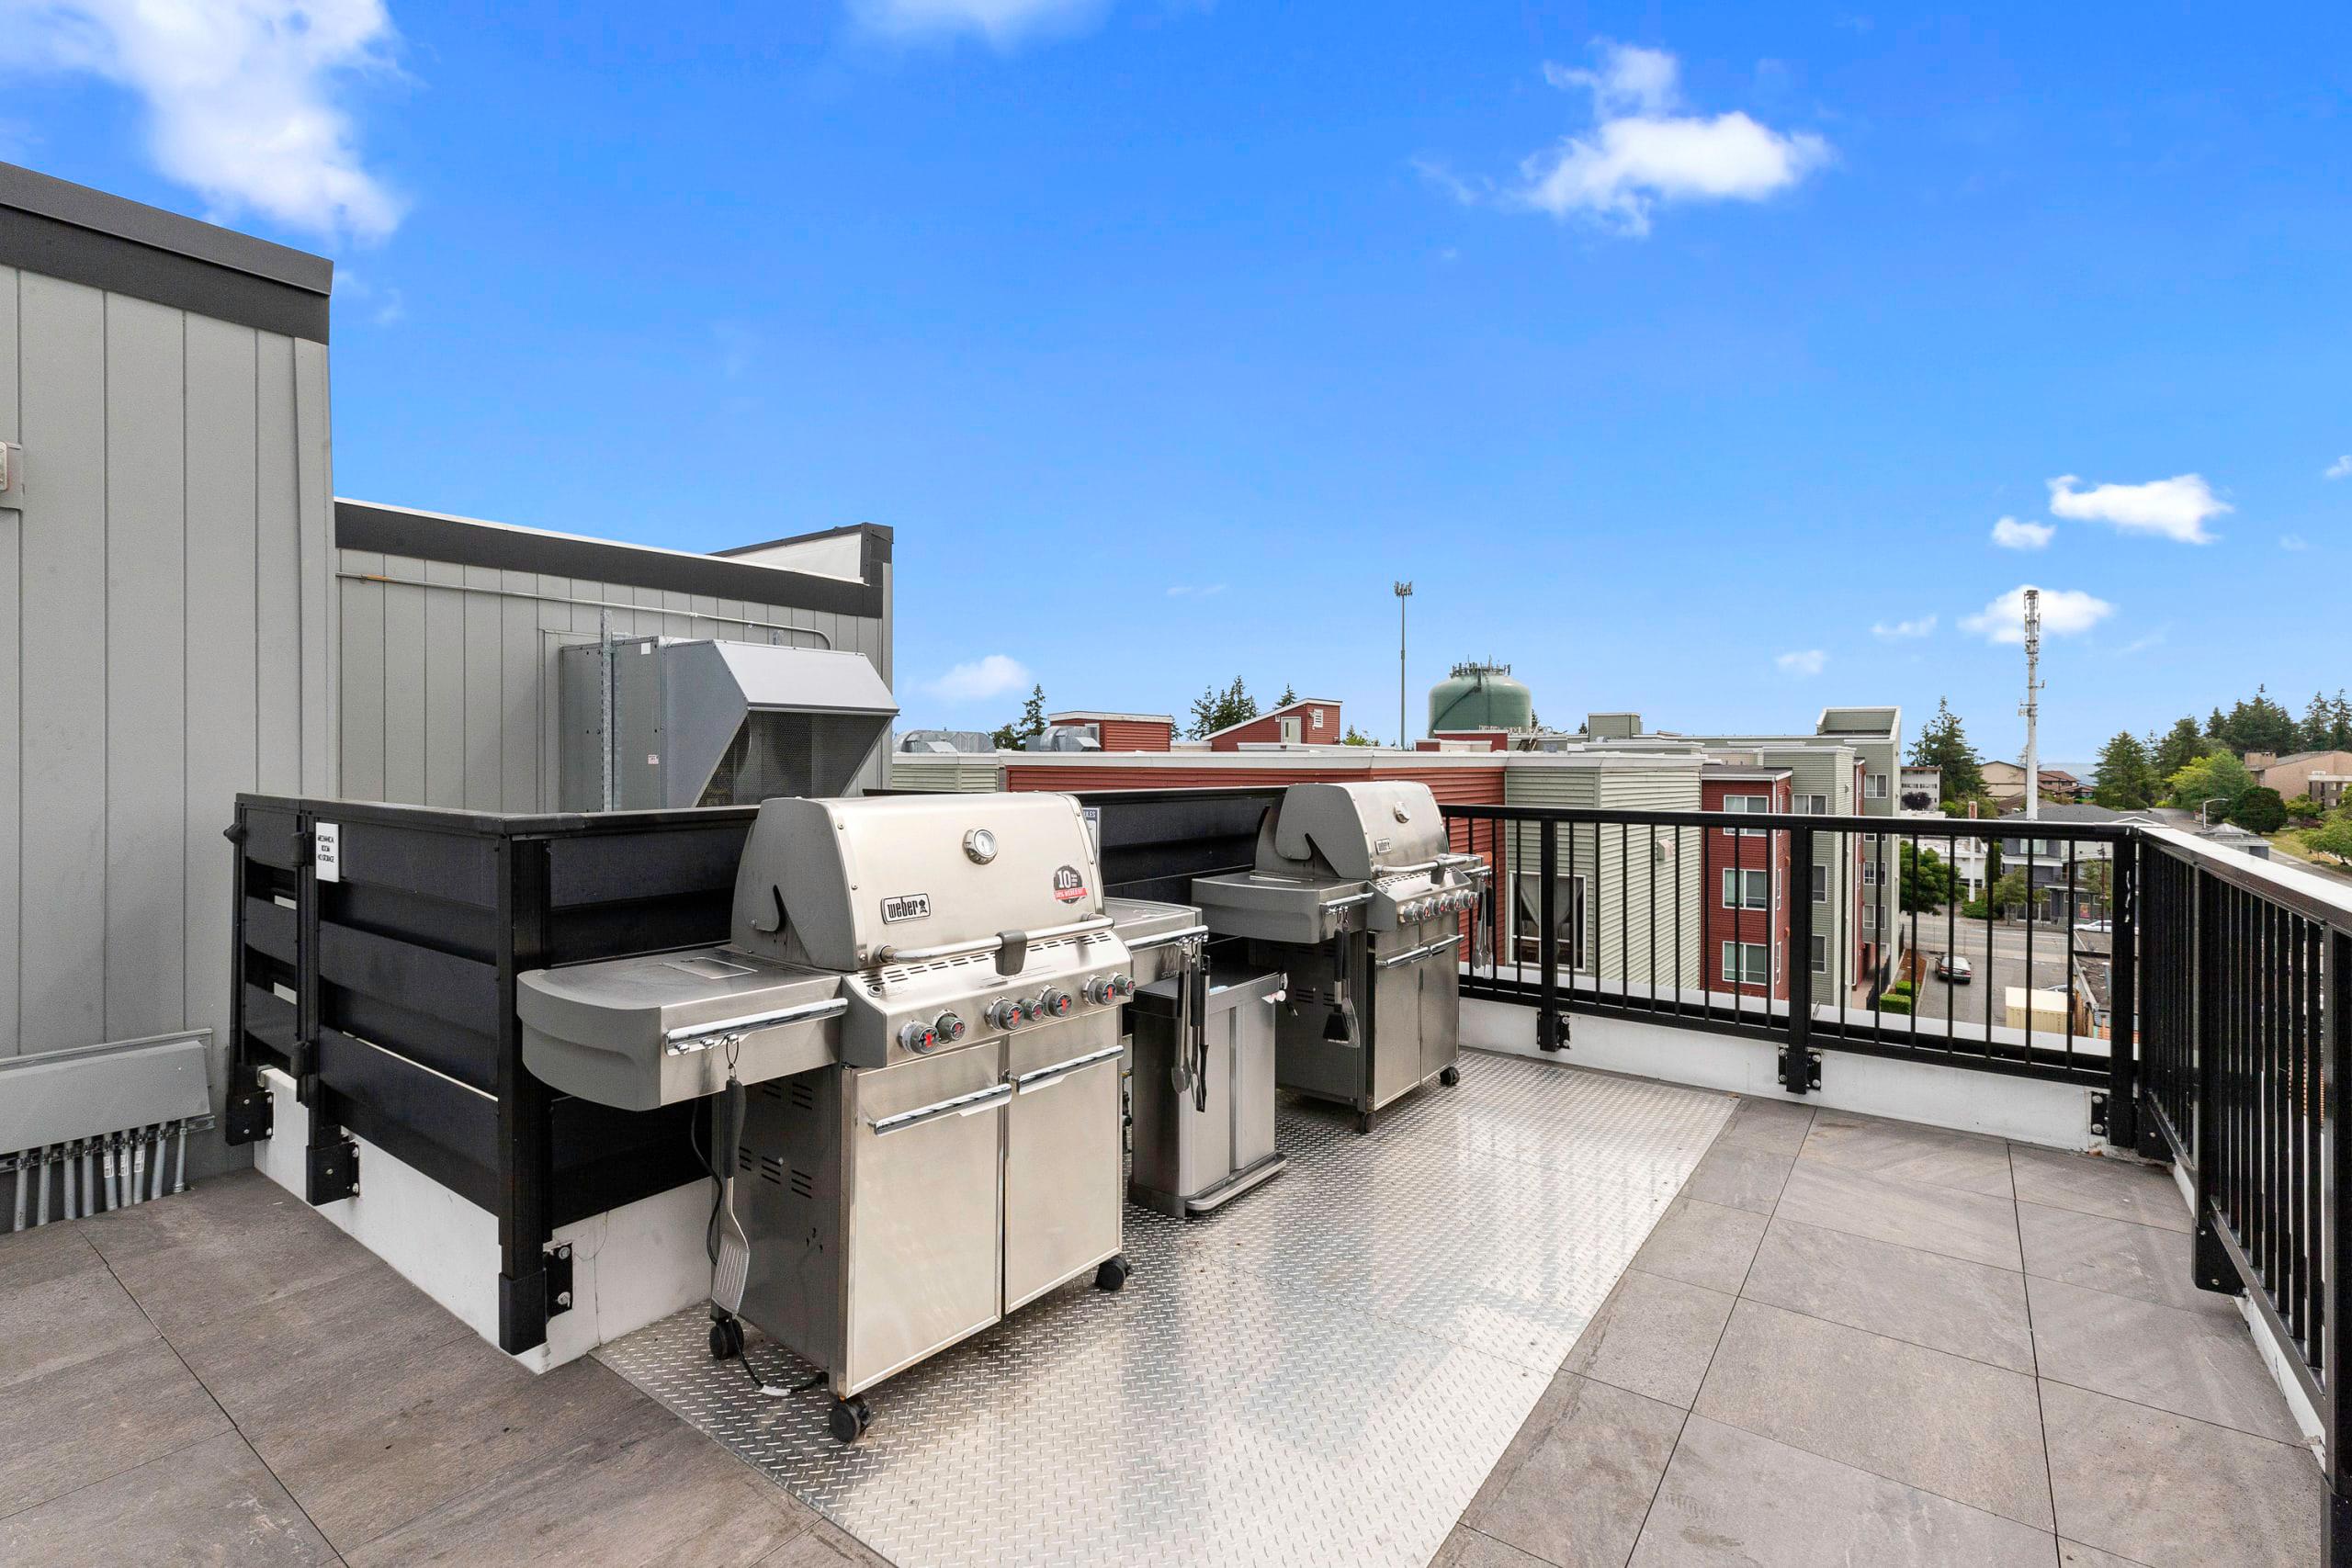 Rooftop Grill Area